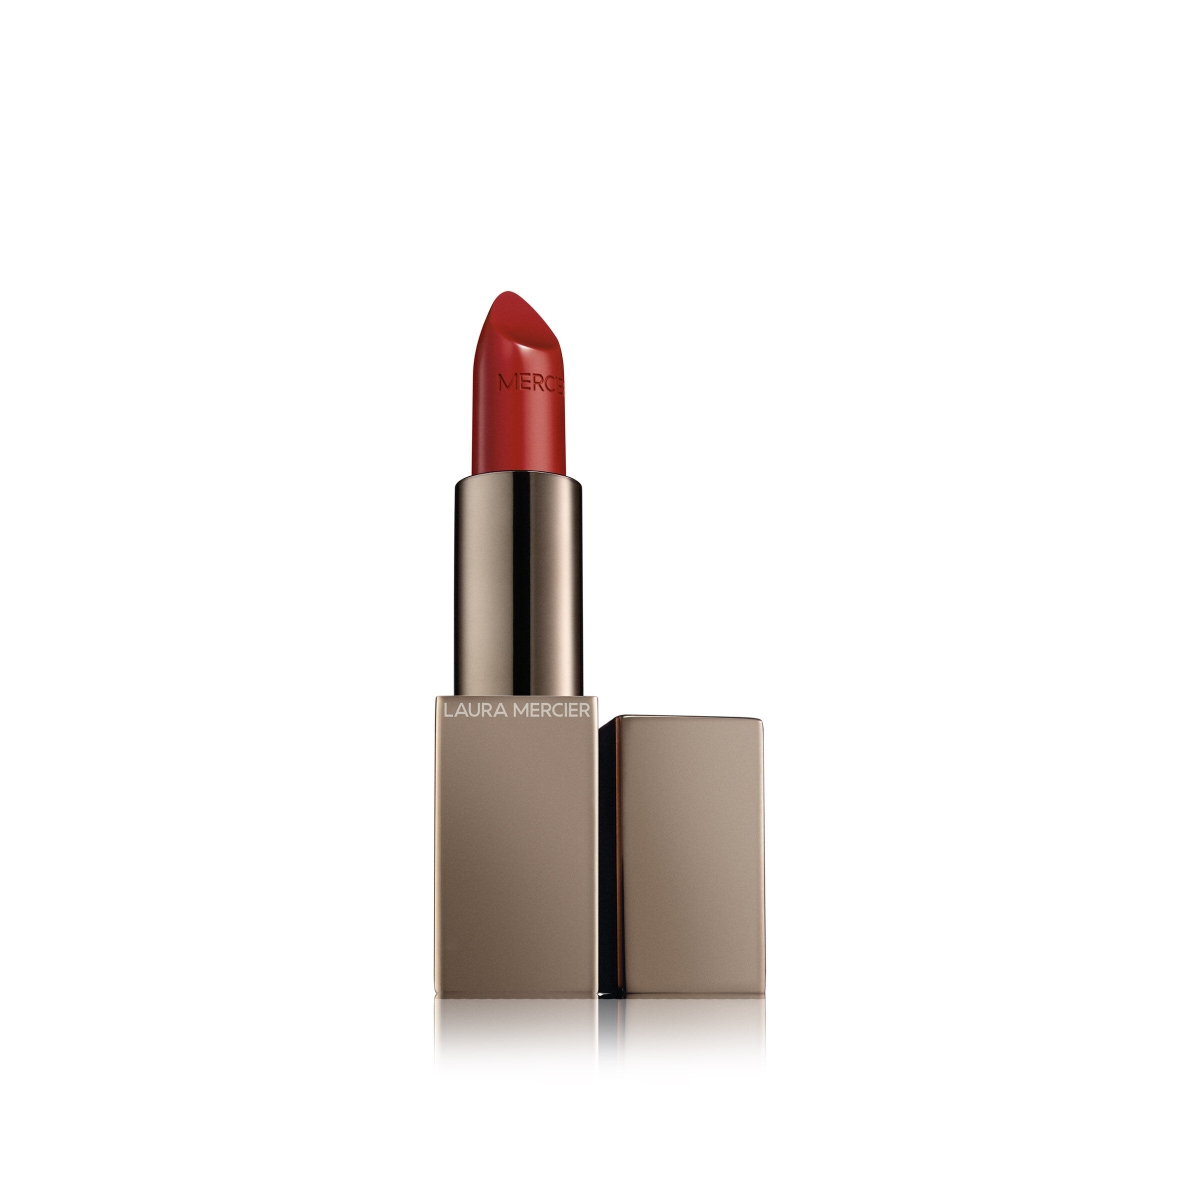 241439 0.12 Oz Rouge Essentiel Silky Creme Lipstick - No.rouge Ultime Classic Red